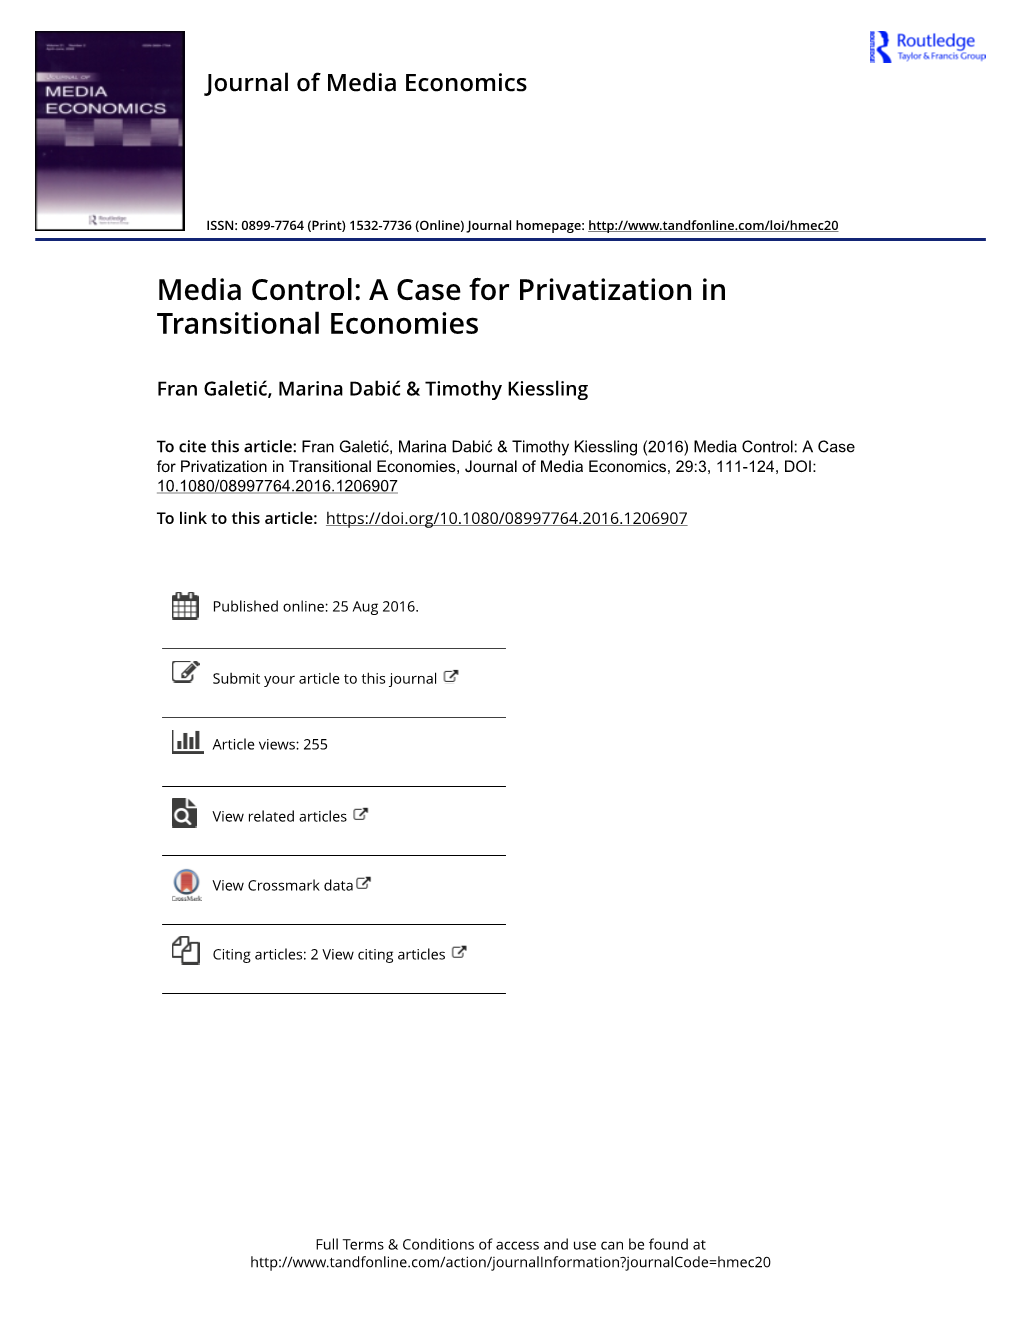 Media Control: a Case for Privatization in Transitional Economies